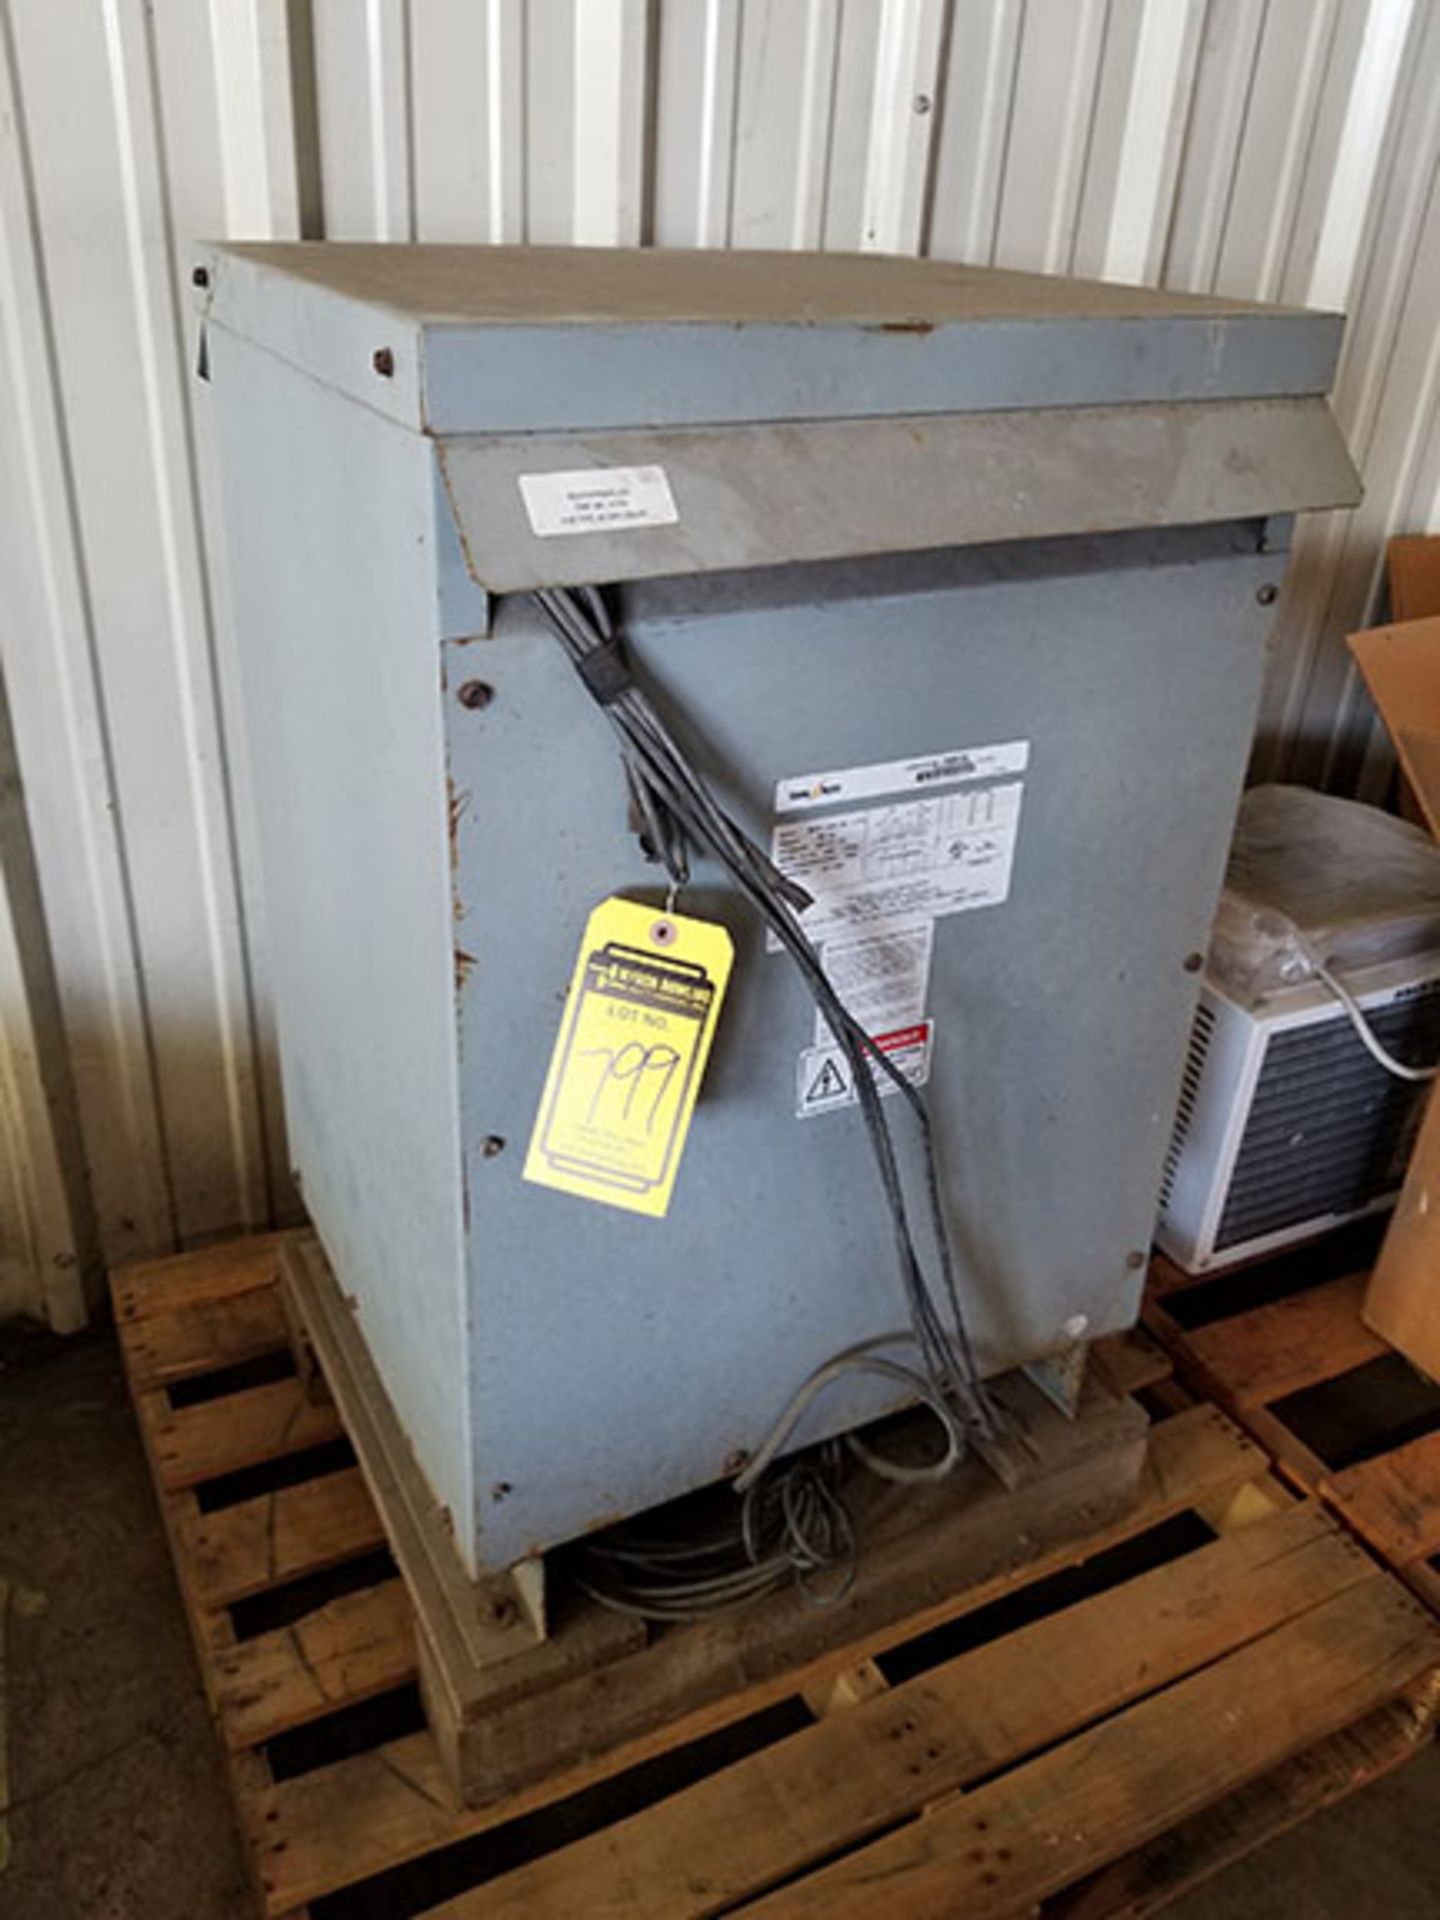 FEDERAL PACIFIC 30KVA DRY TYPE TRANSFORMER, 3 PHASE, 60HZ, MODEL 36B